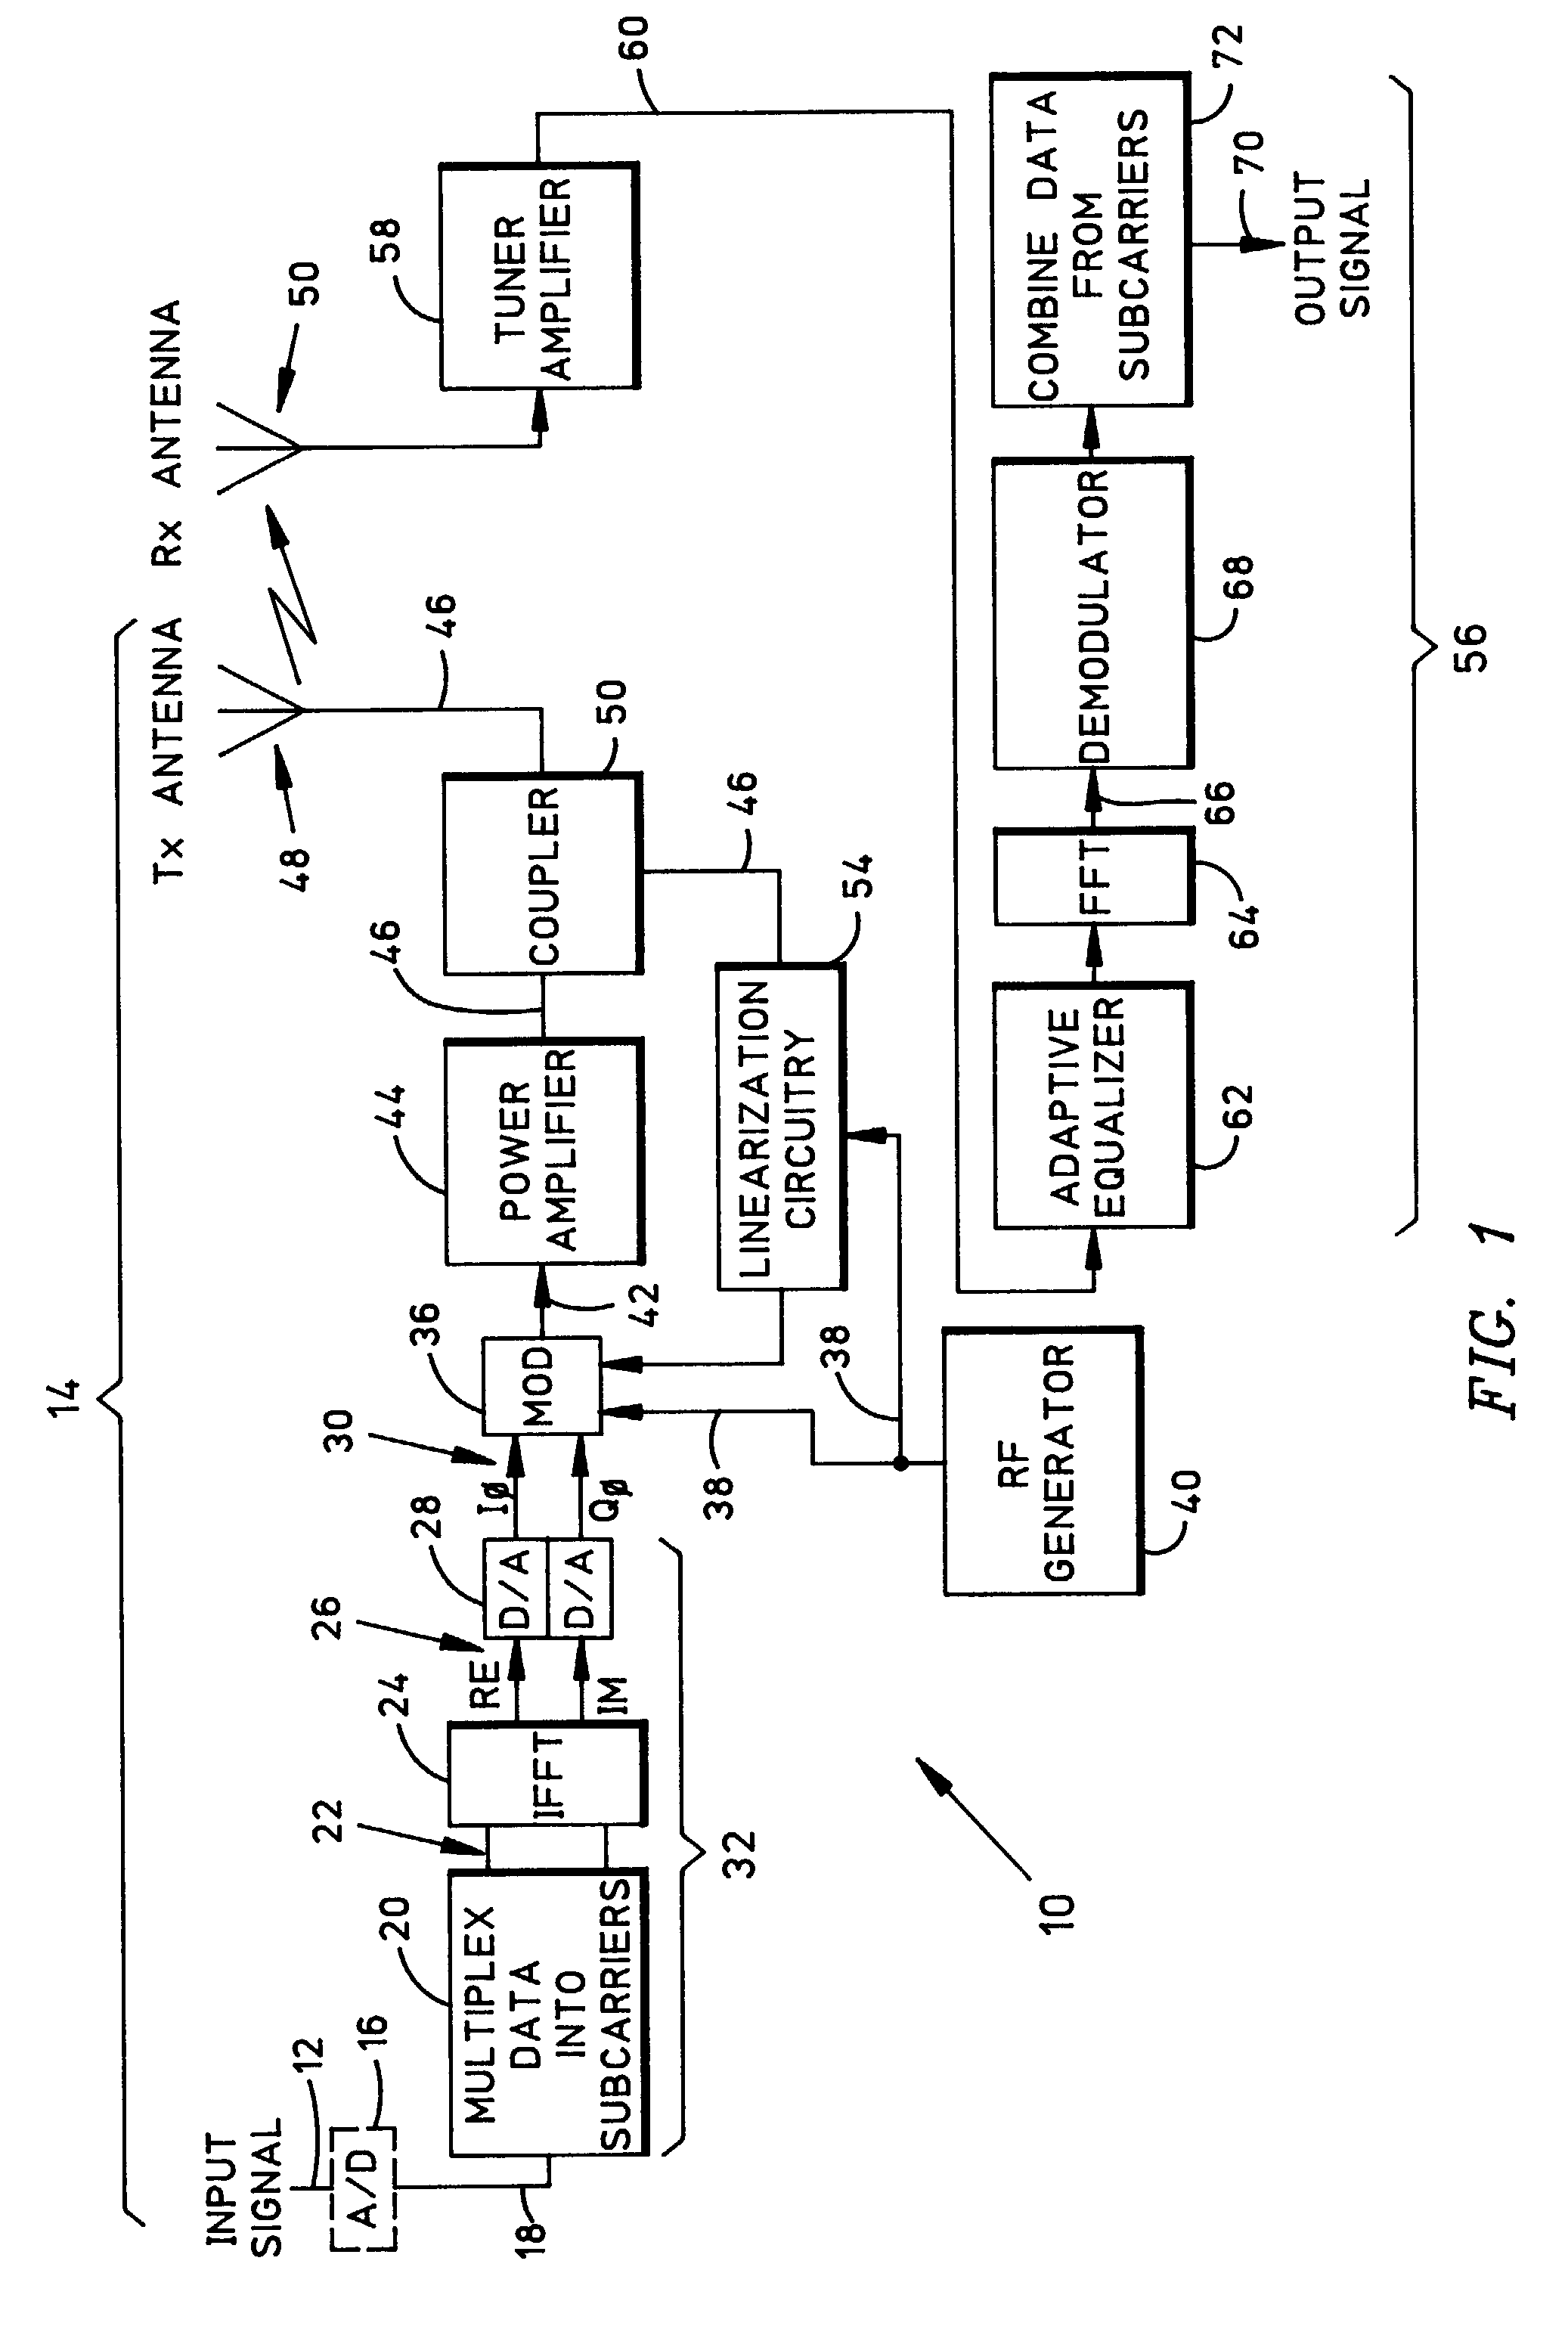 Method and apparatus for transferring multiple symbol streams at low bit-error rates in a narrowband channel